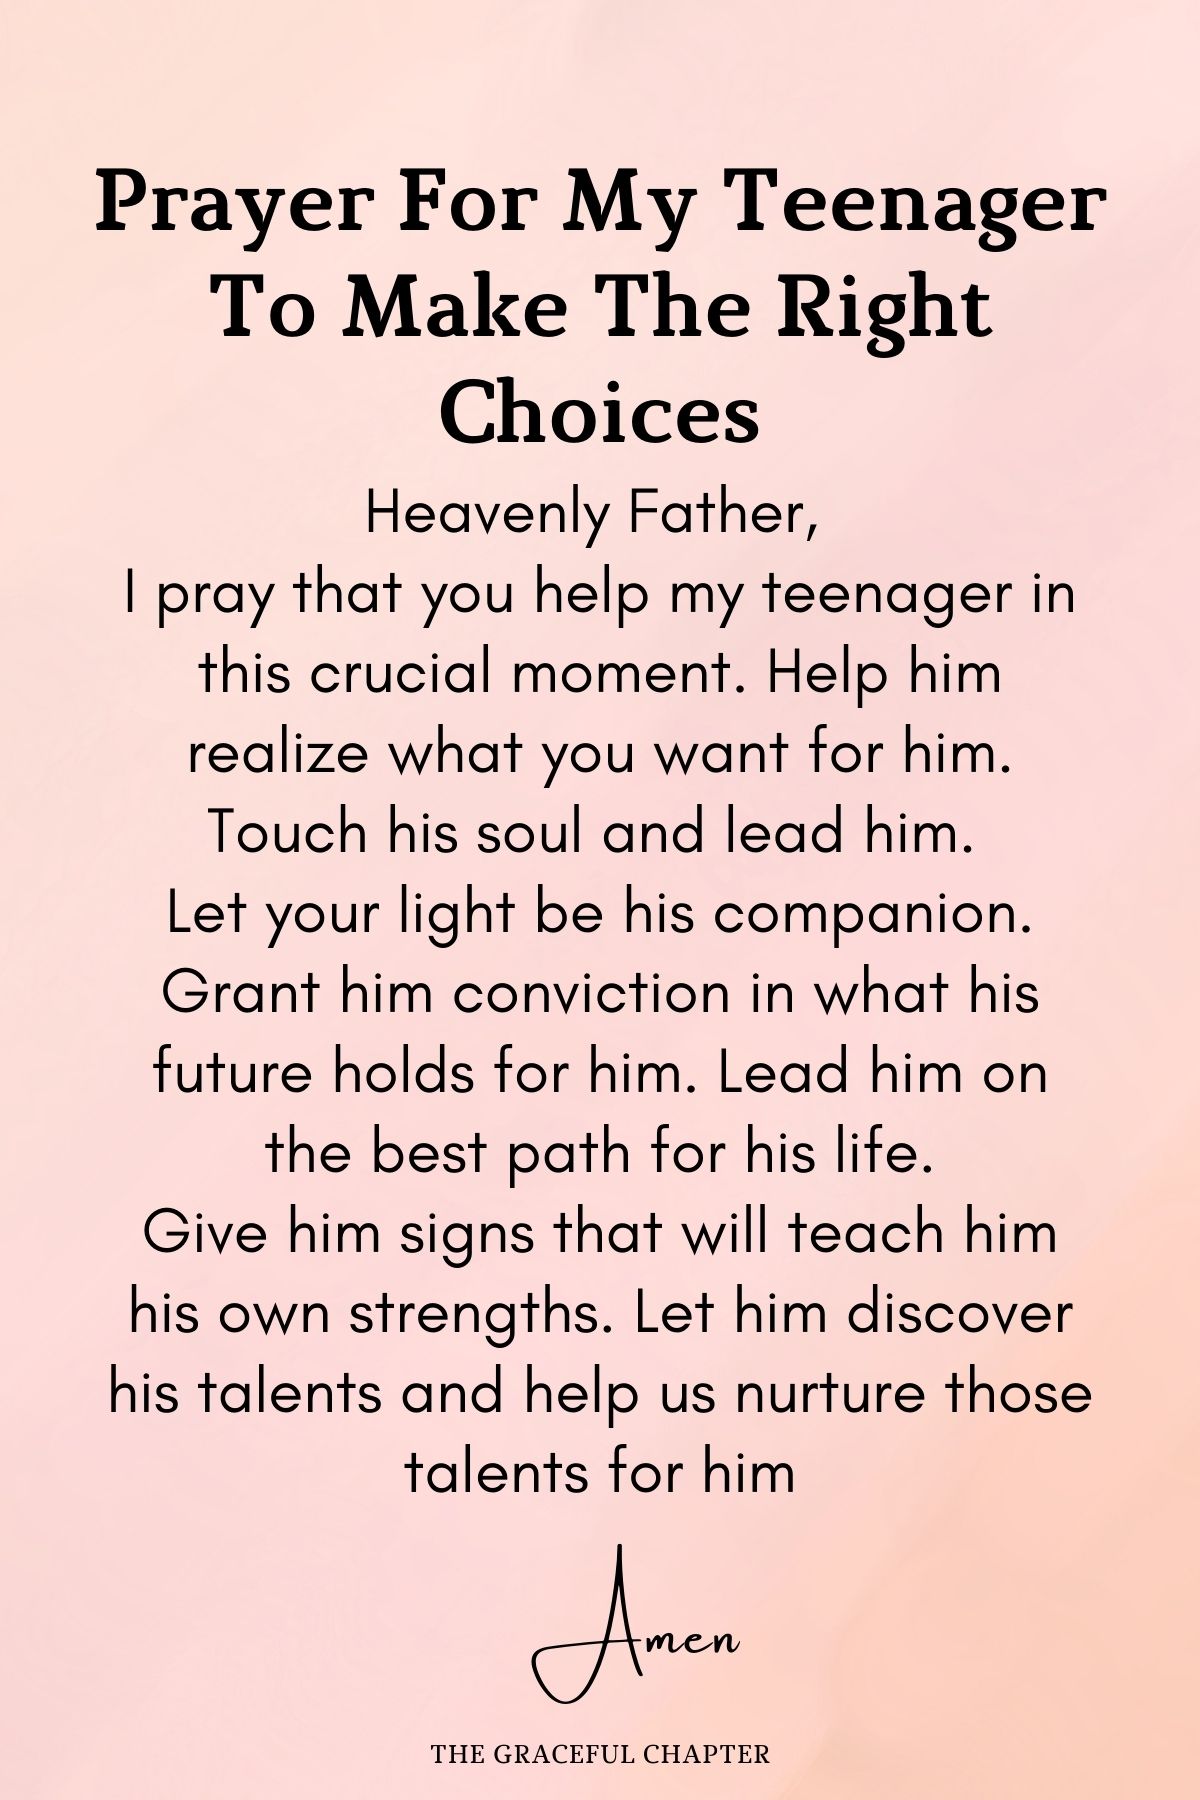 Prayer for my teenager to make the right choices